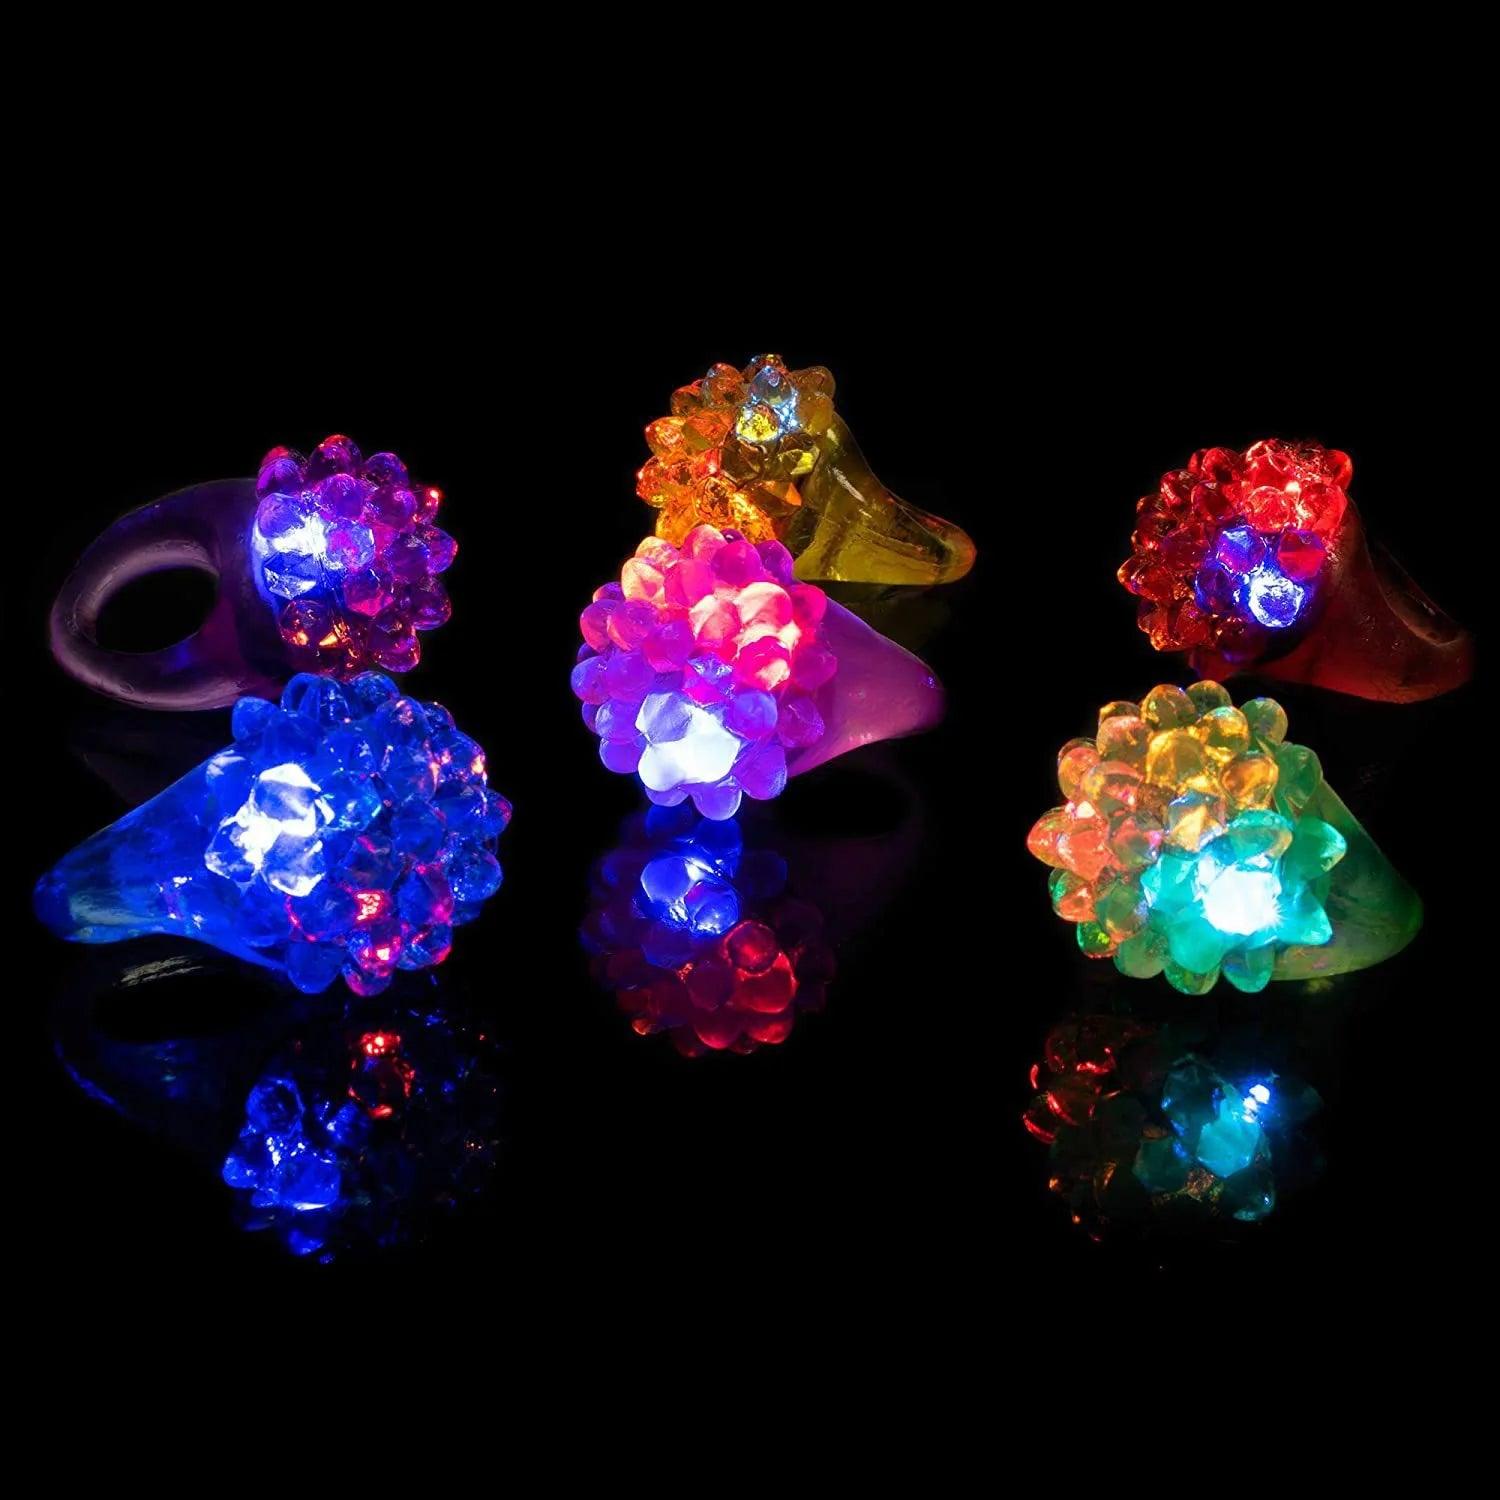 LED Glow Rings - Set of 10/20/30/40/50/60 Light-Up Luminous Party Favor Toys with Flashing Lights for Dark Parties  ourlum.com   